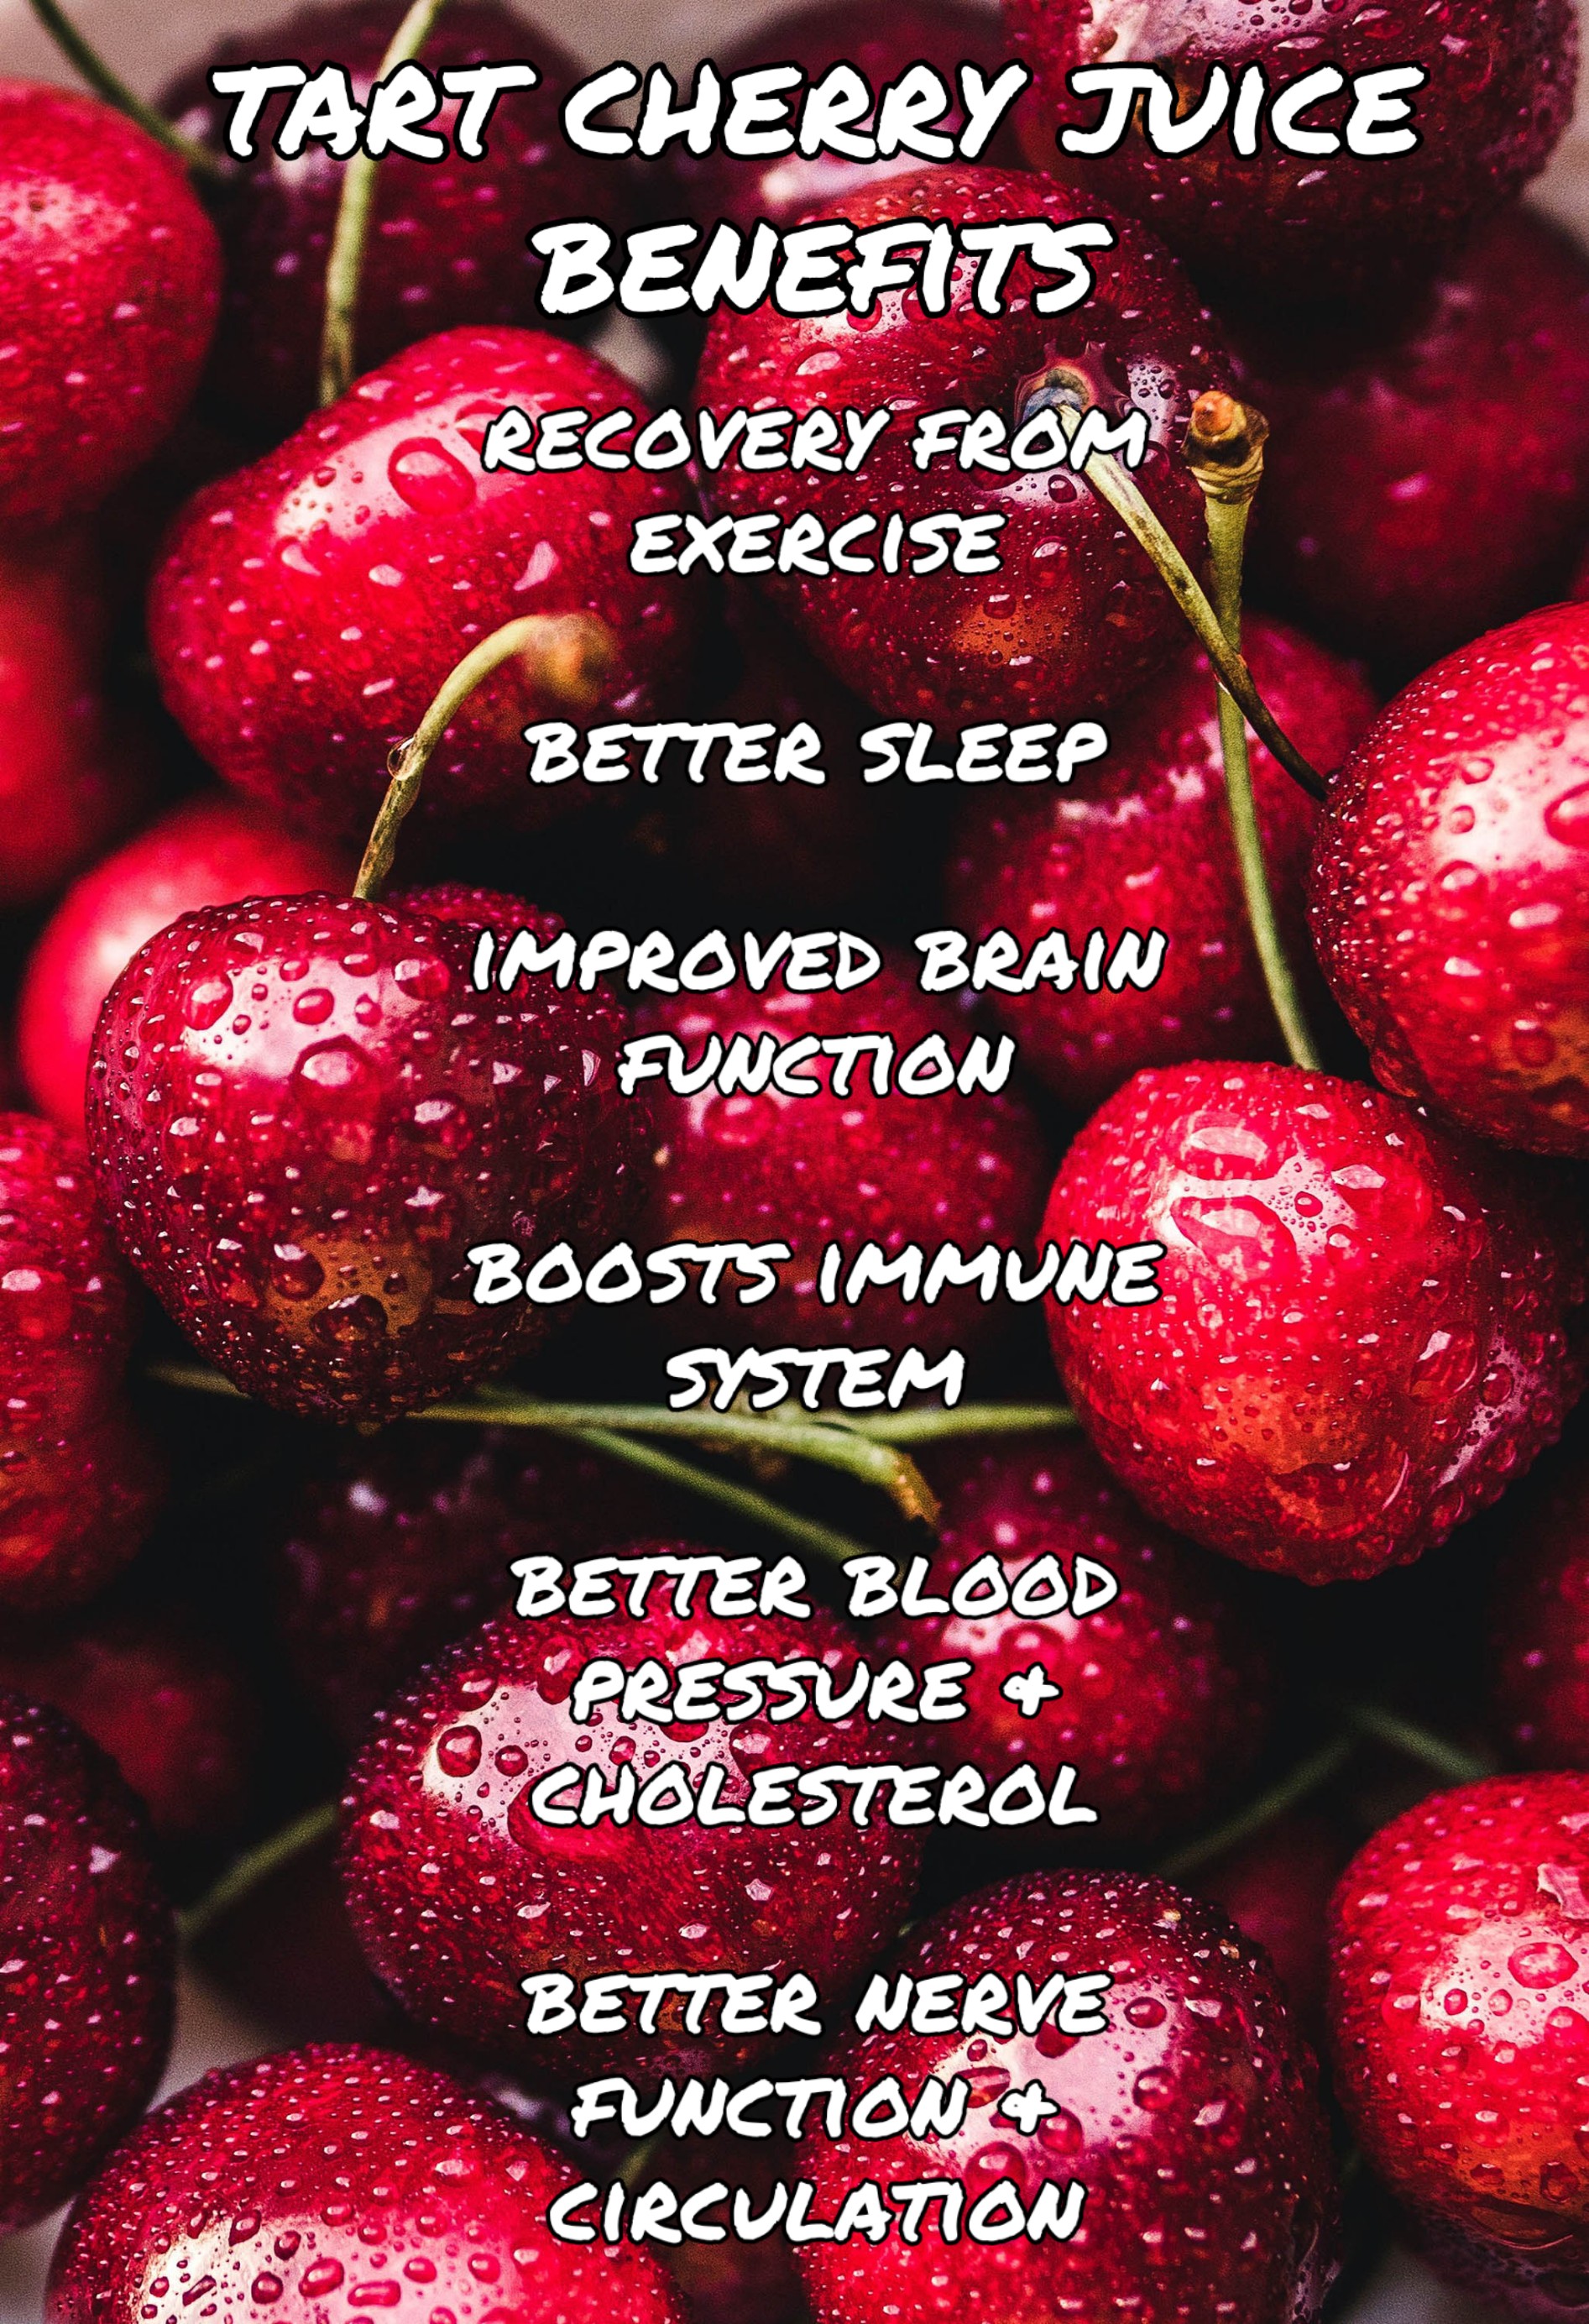 Tart cherry juice for weight loss